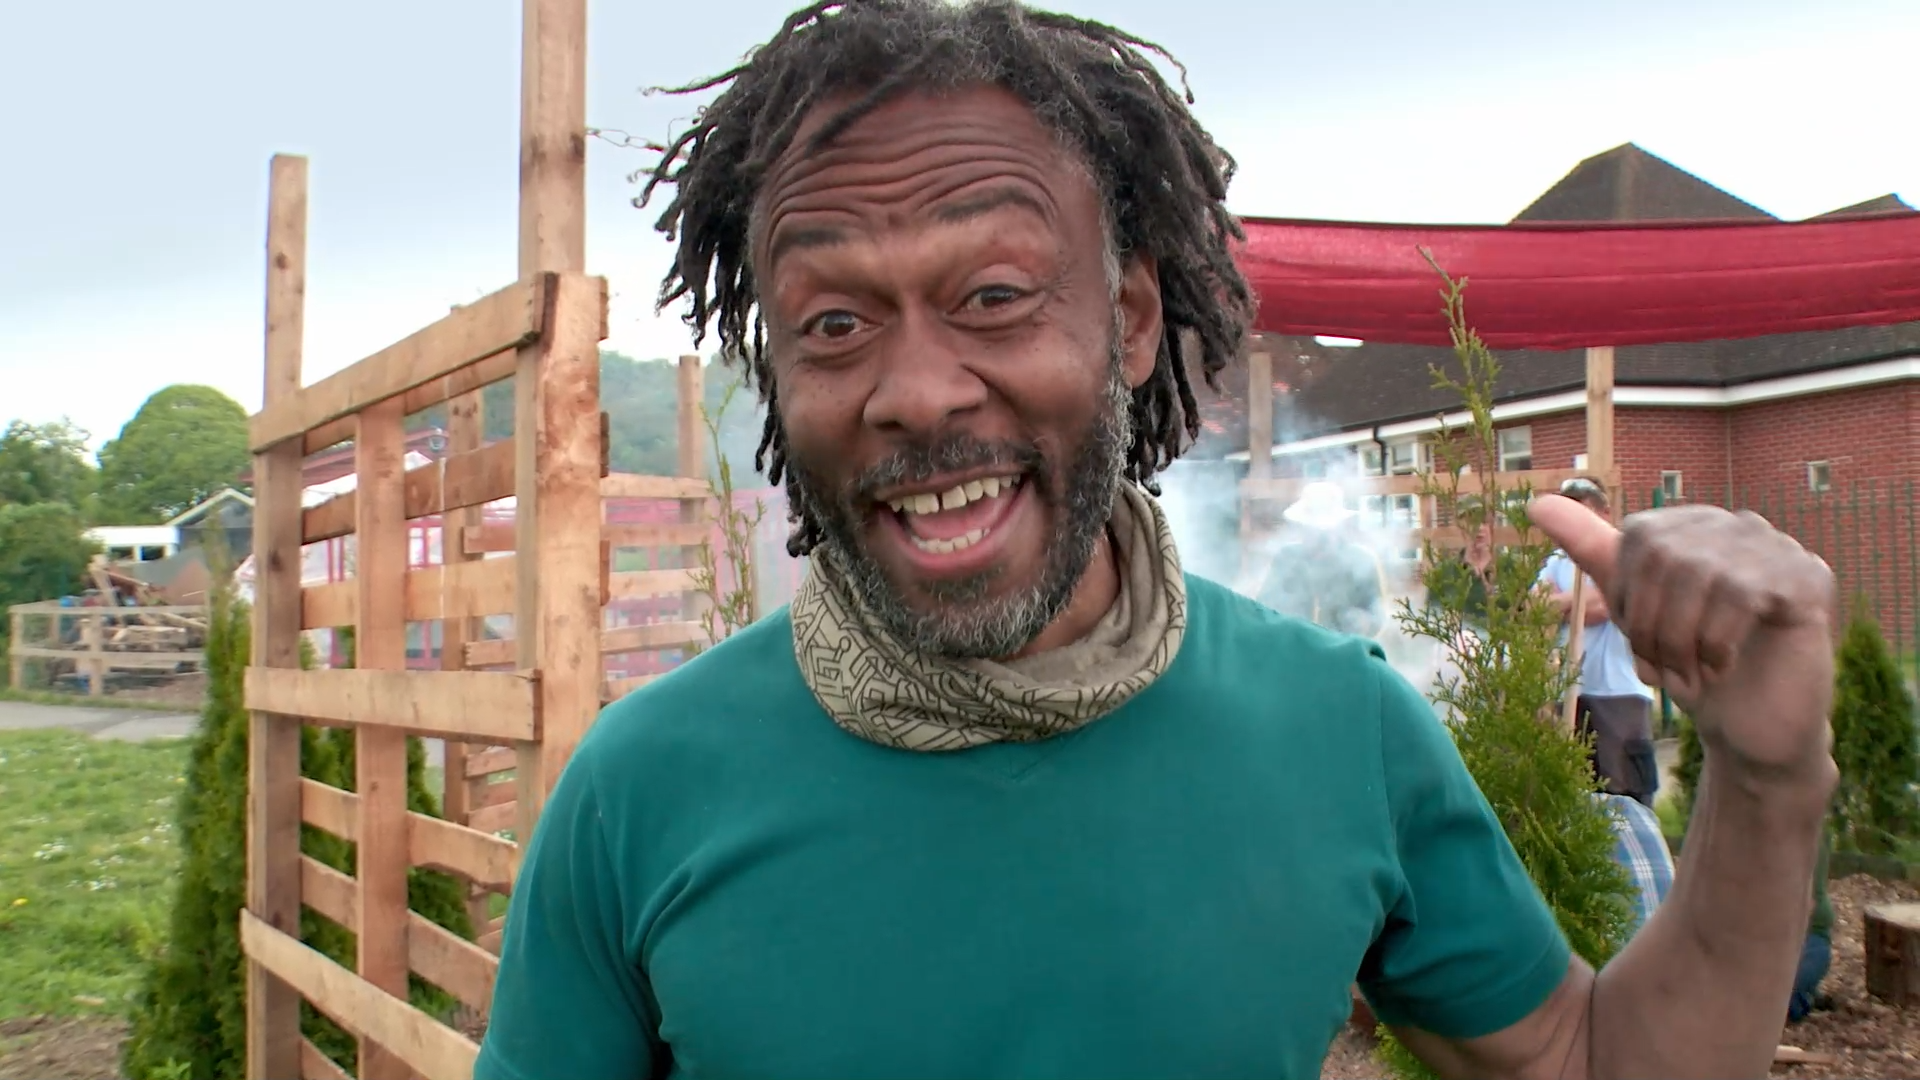 Danny Clarke is smiling open mouth mid-speech and pointing with his thumb behind him. He is wearing a green, turquoise tshirt and a green baclava scarf. He has short greying black locs. Behidn his is a pallet fence and somg lawn. You can see smoke behind him but not the source. There is also a red marquee covering on the right side and houses in the distance.